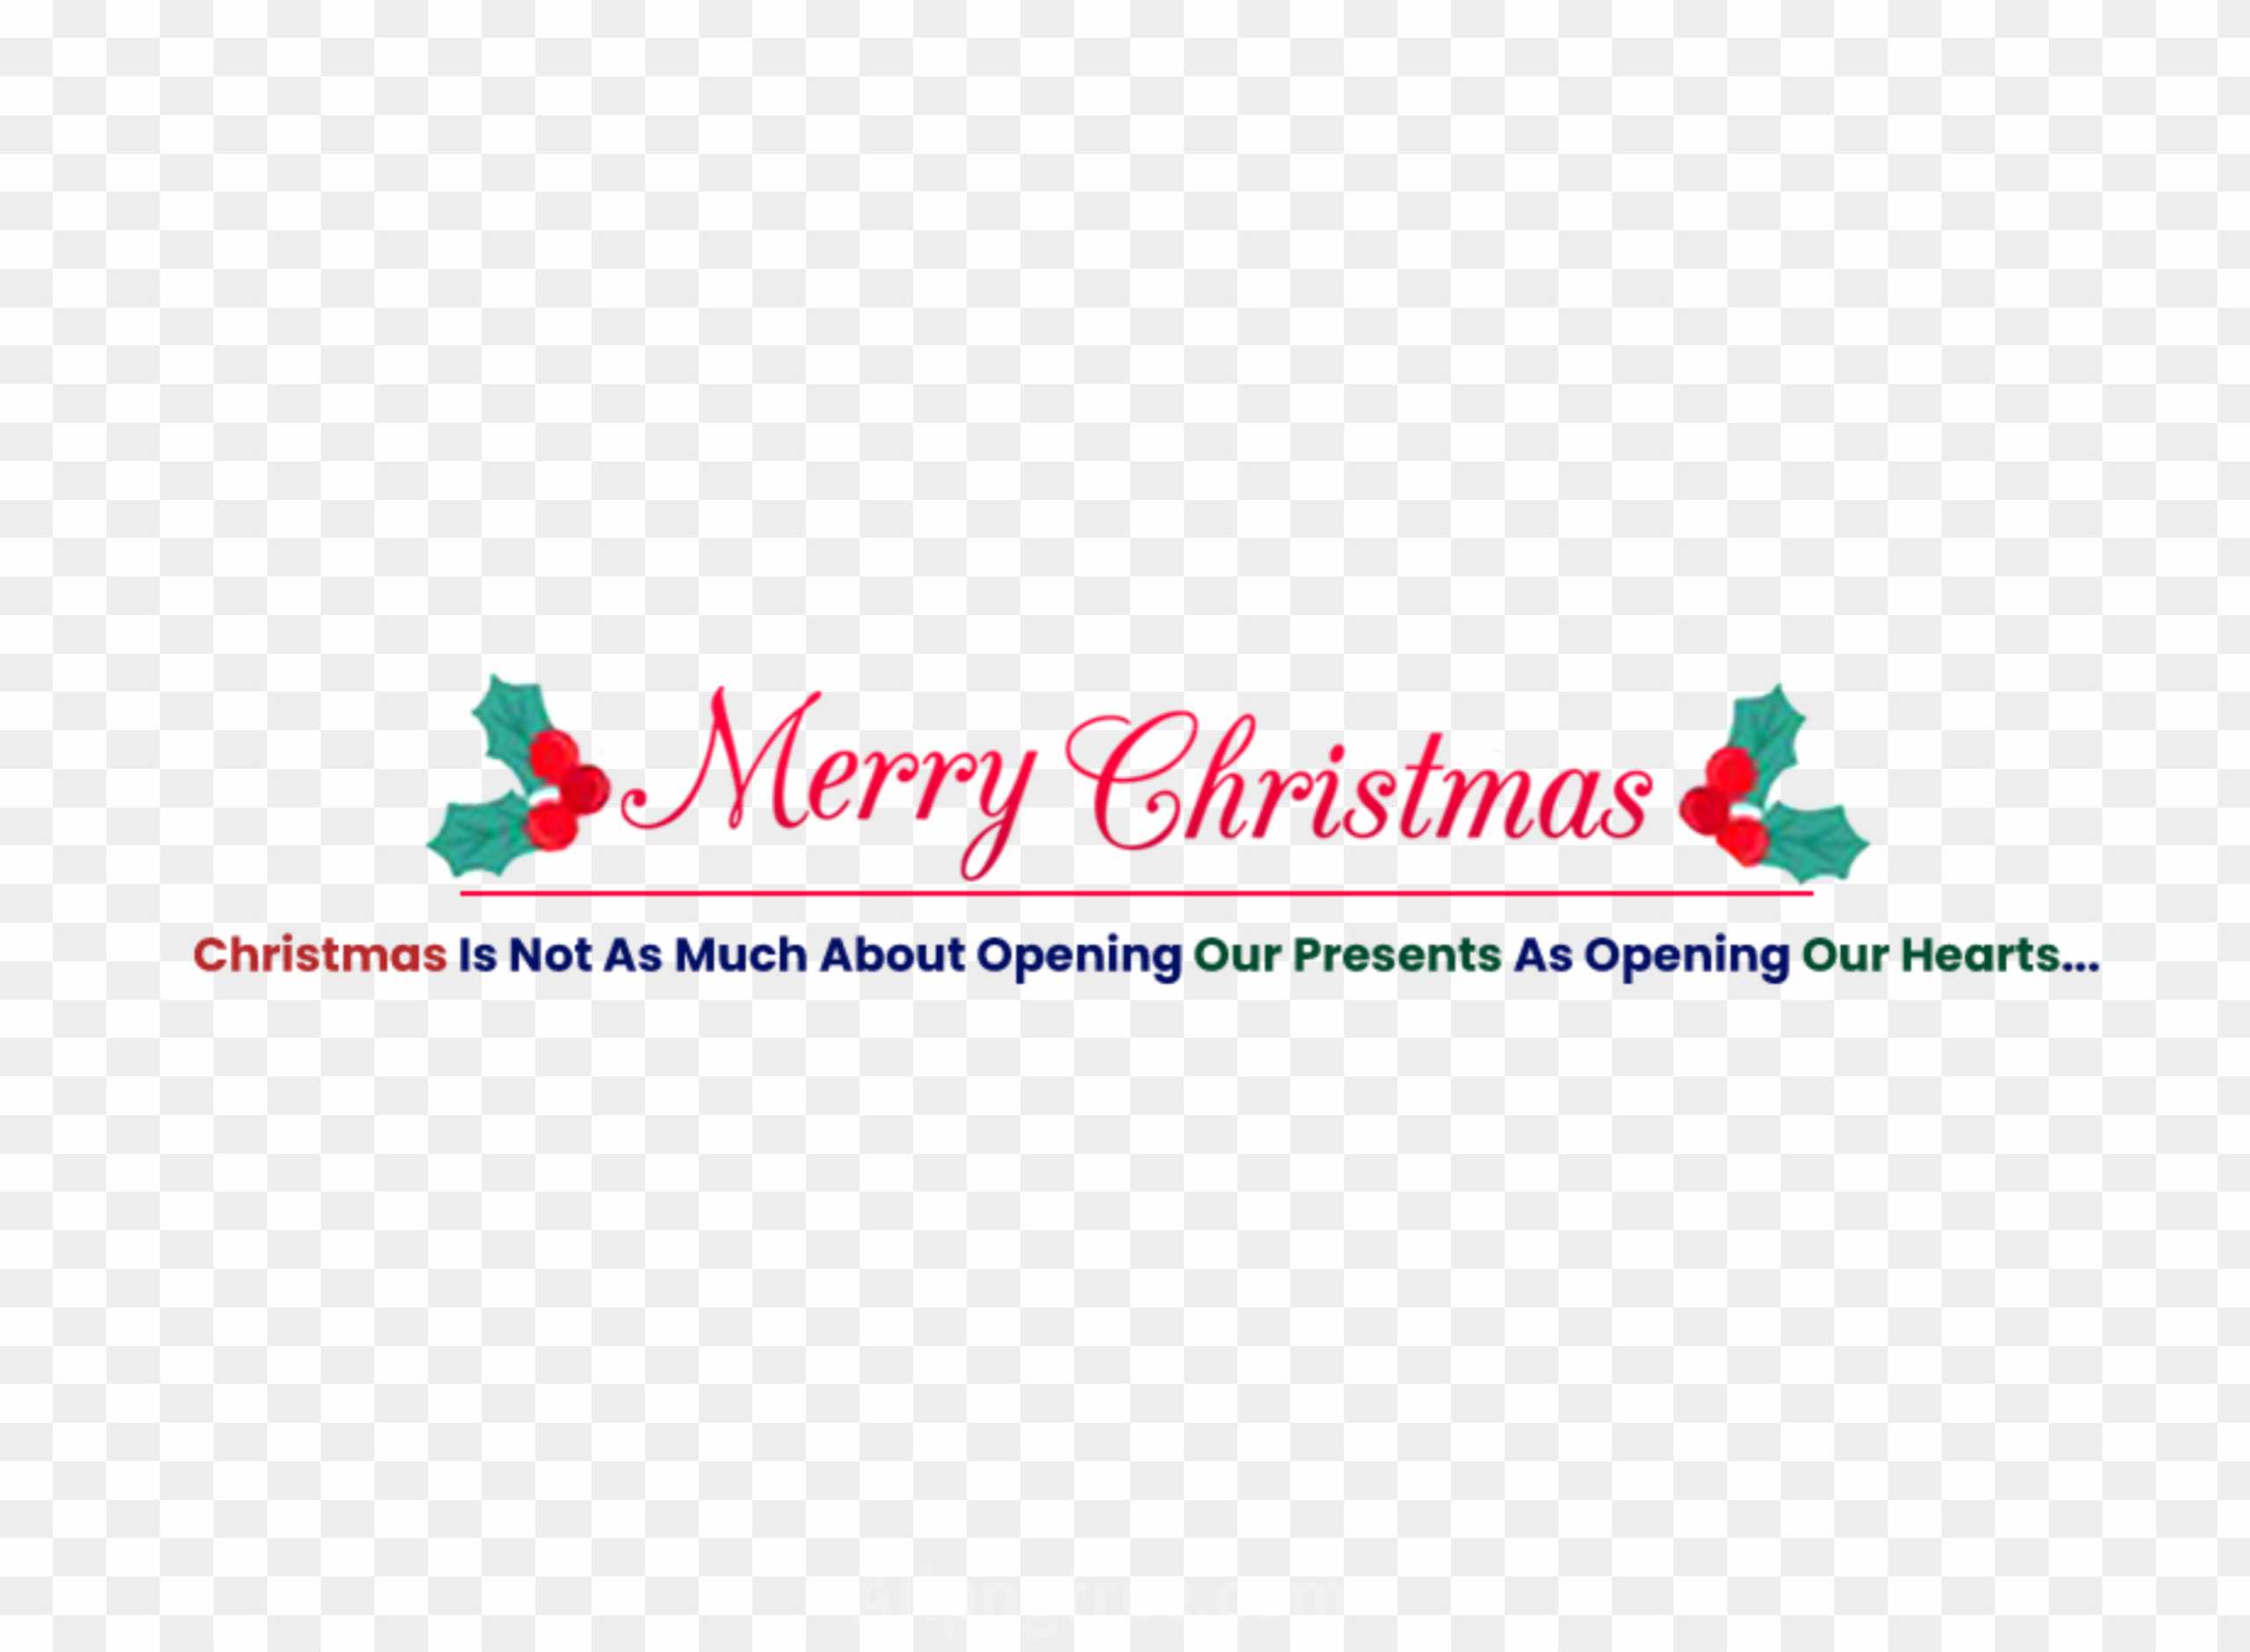 Merry Christmas text png images